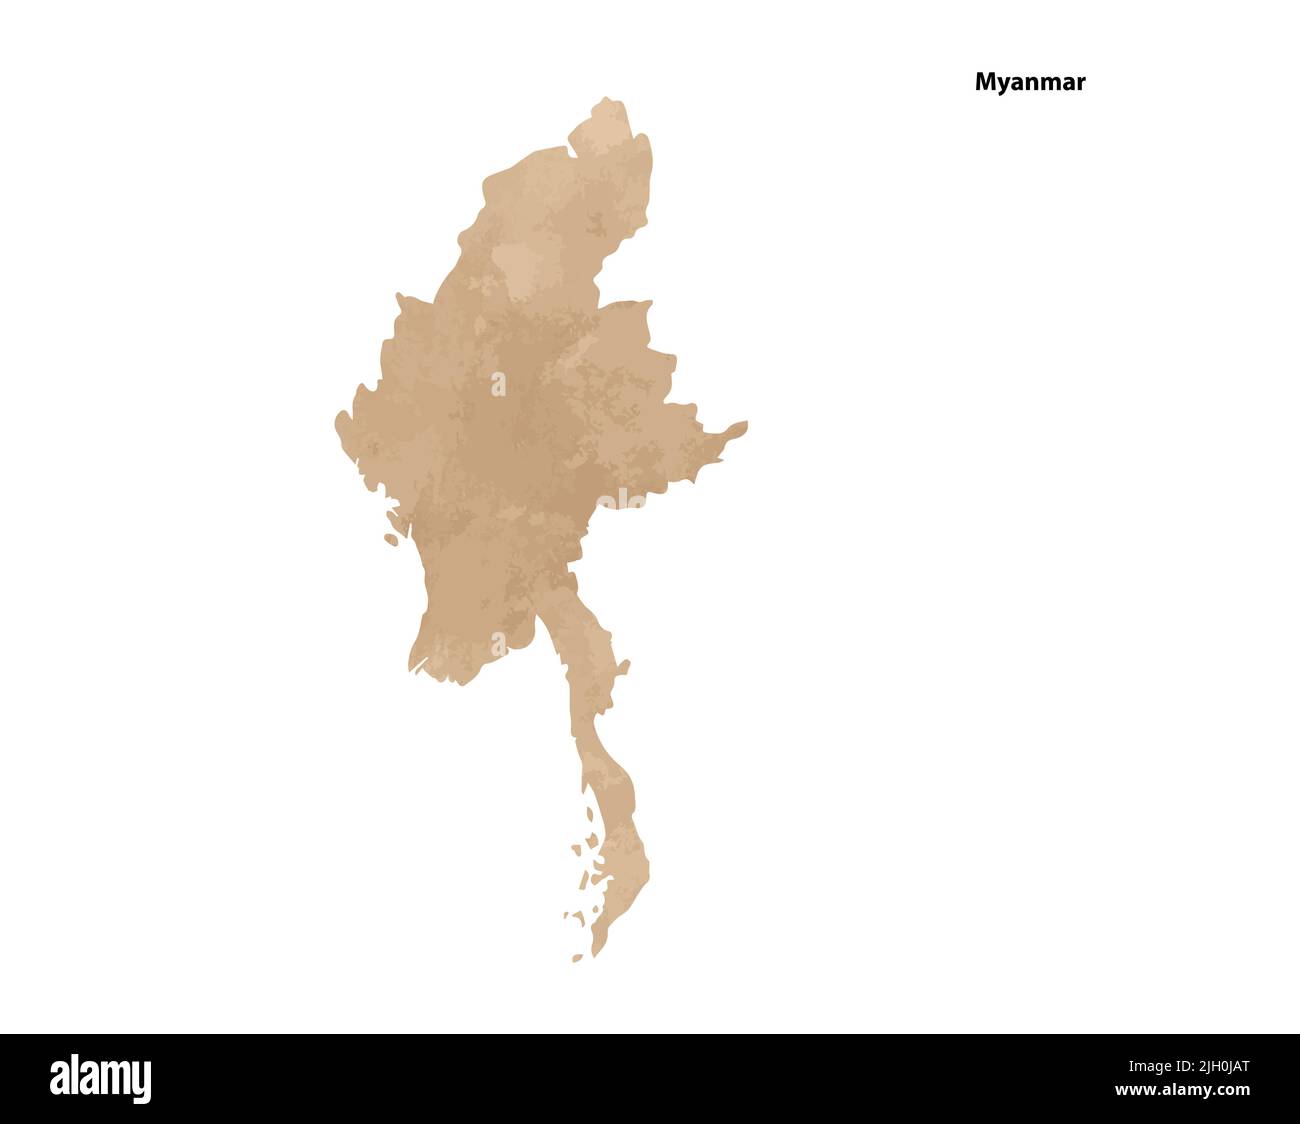 Old vintage paper textured map of Myanmar Country - Vector illustration Stock Vector